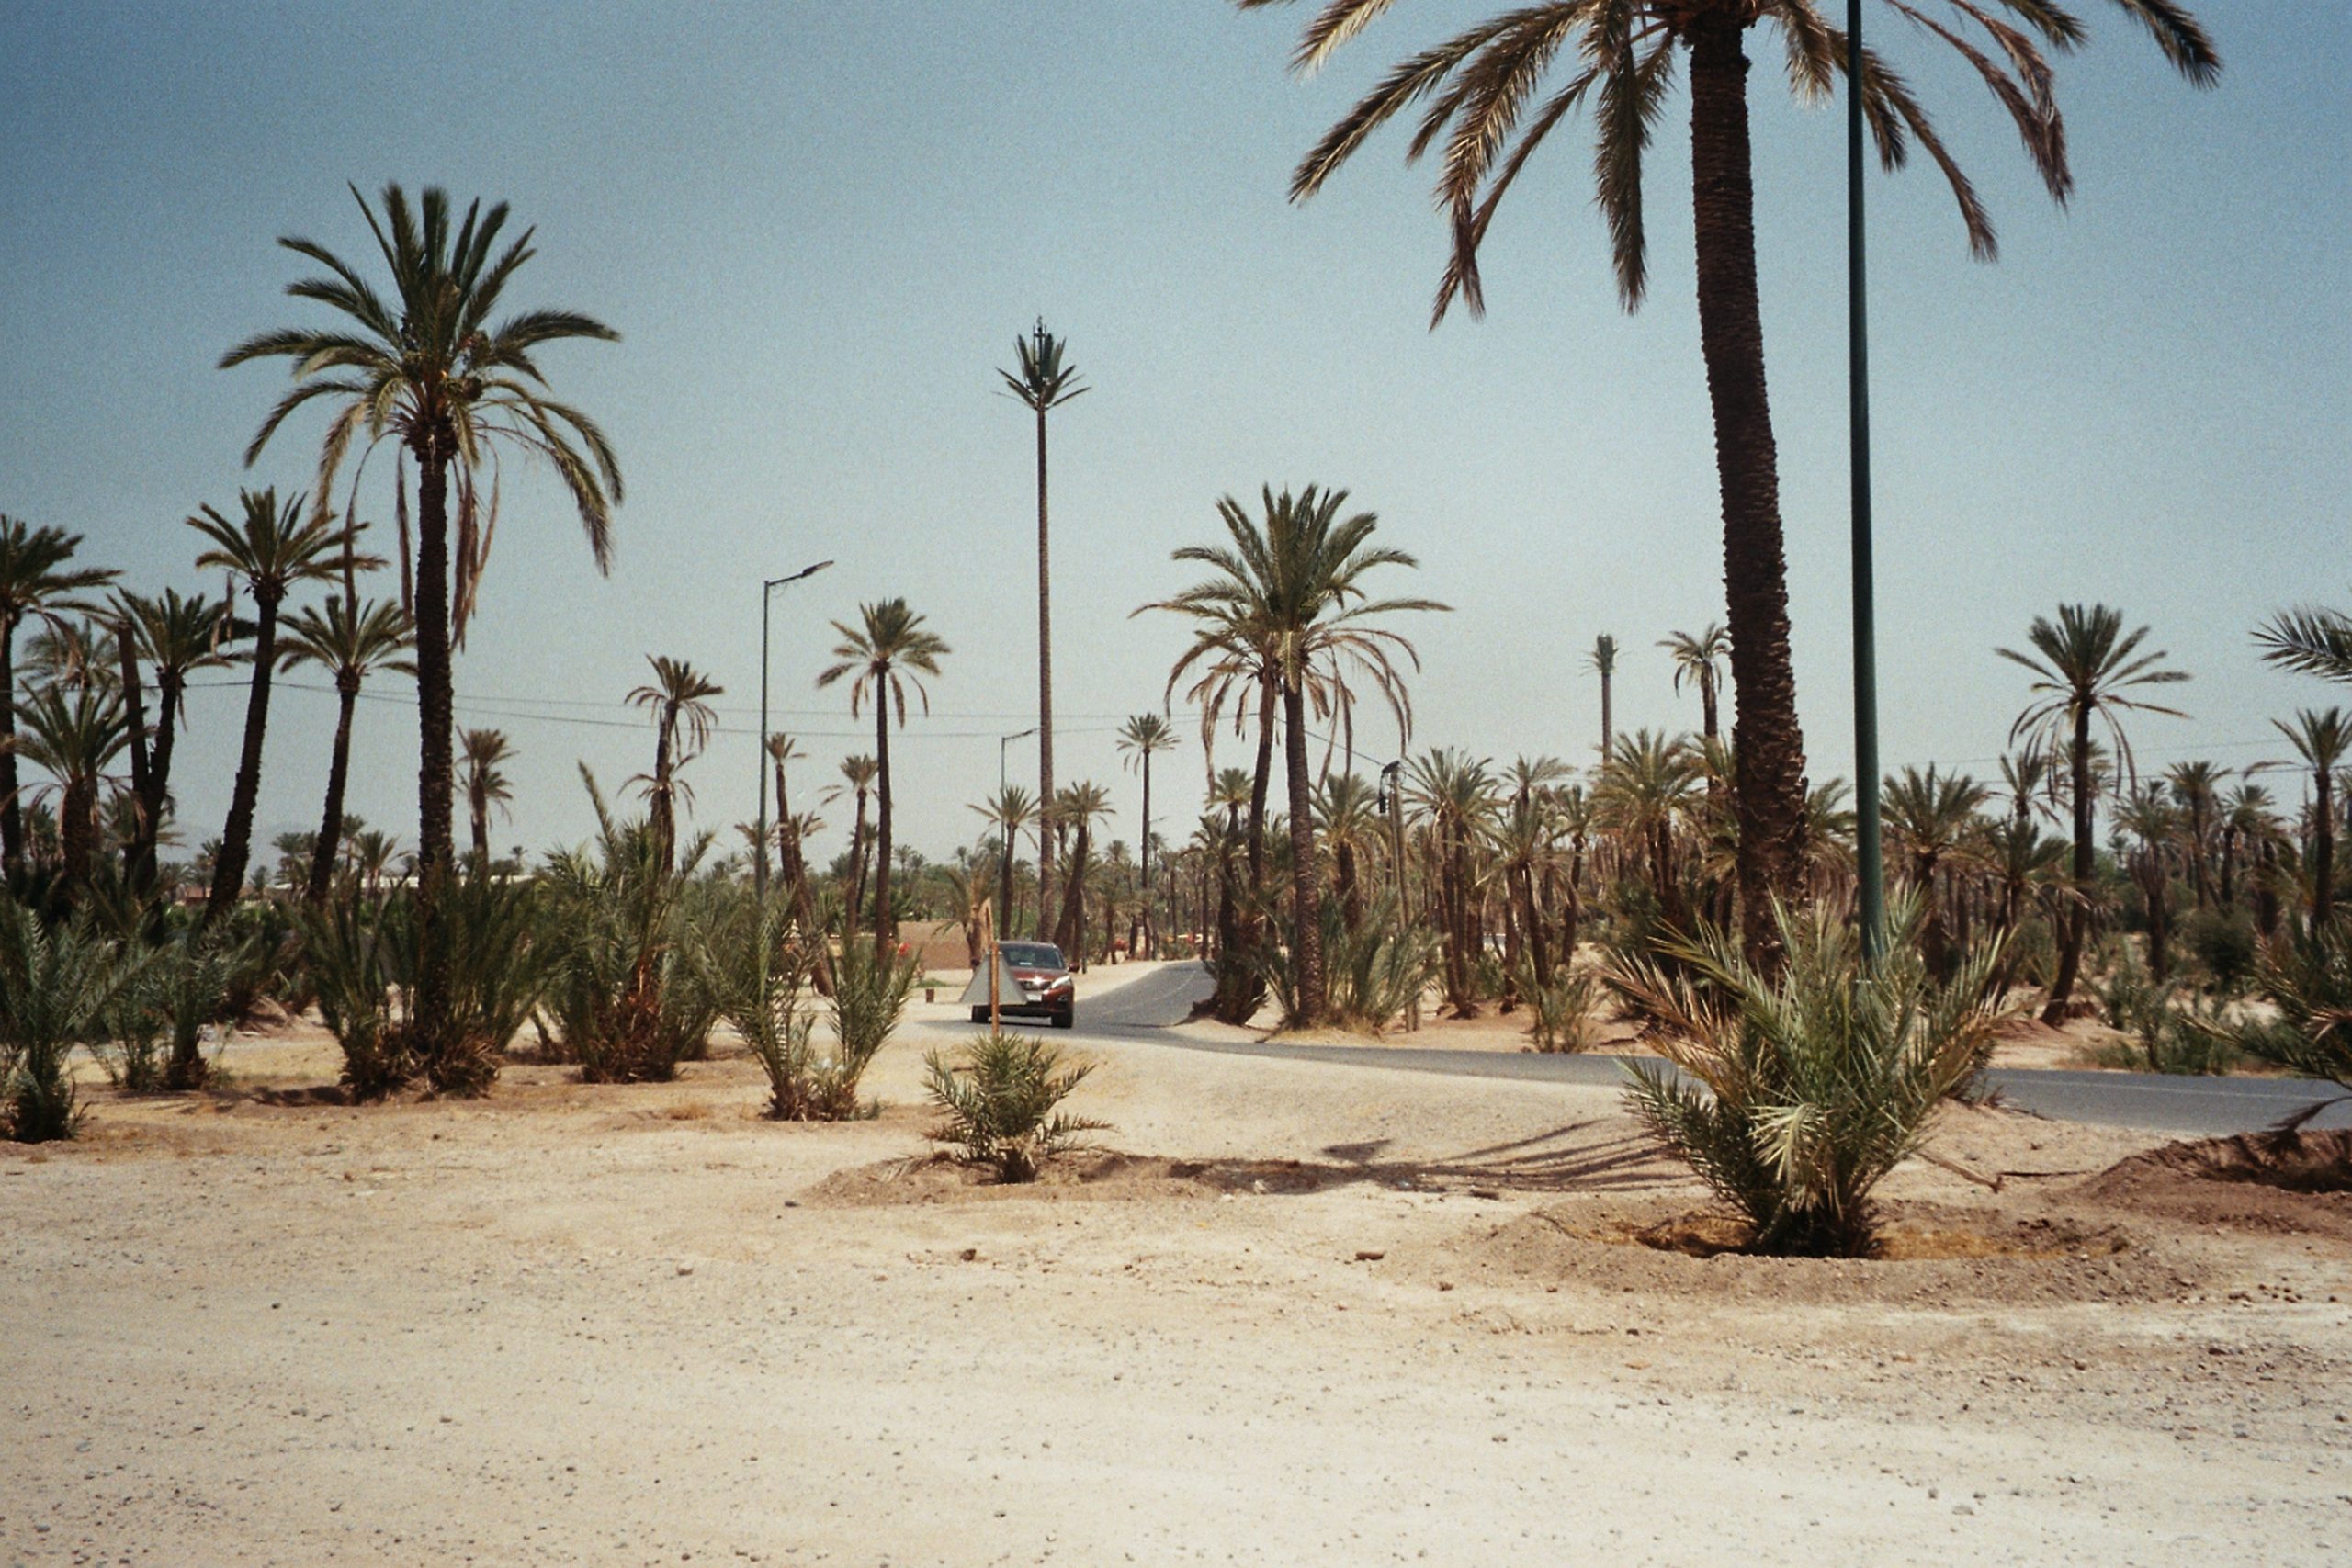 gallery image for Private Quad Biking Palm Oasis Marrakech